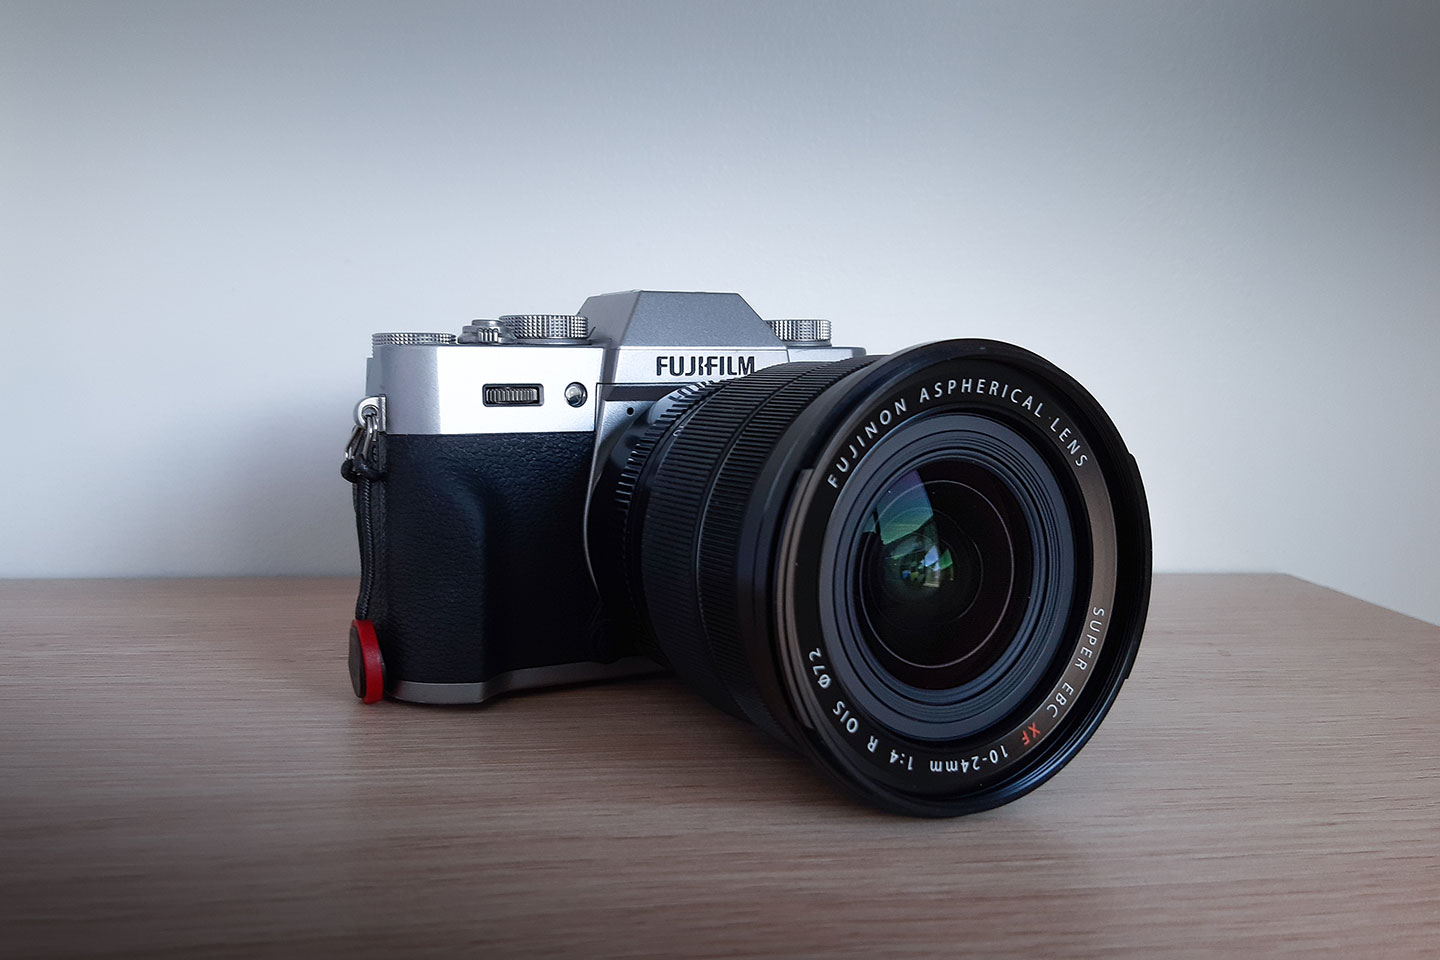 A Fujifilm X-T30 mirrorless camera with an 10-24mm wide angle lens which I believe is a great addition to any travellers photography equipment list.